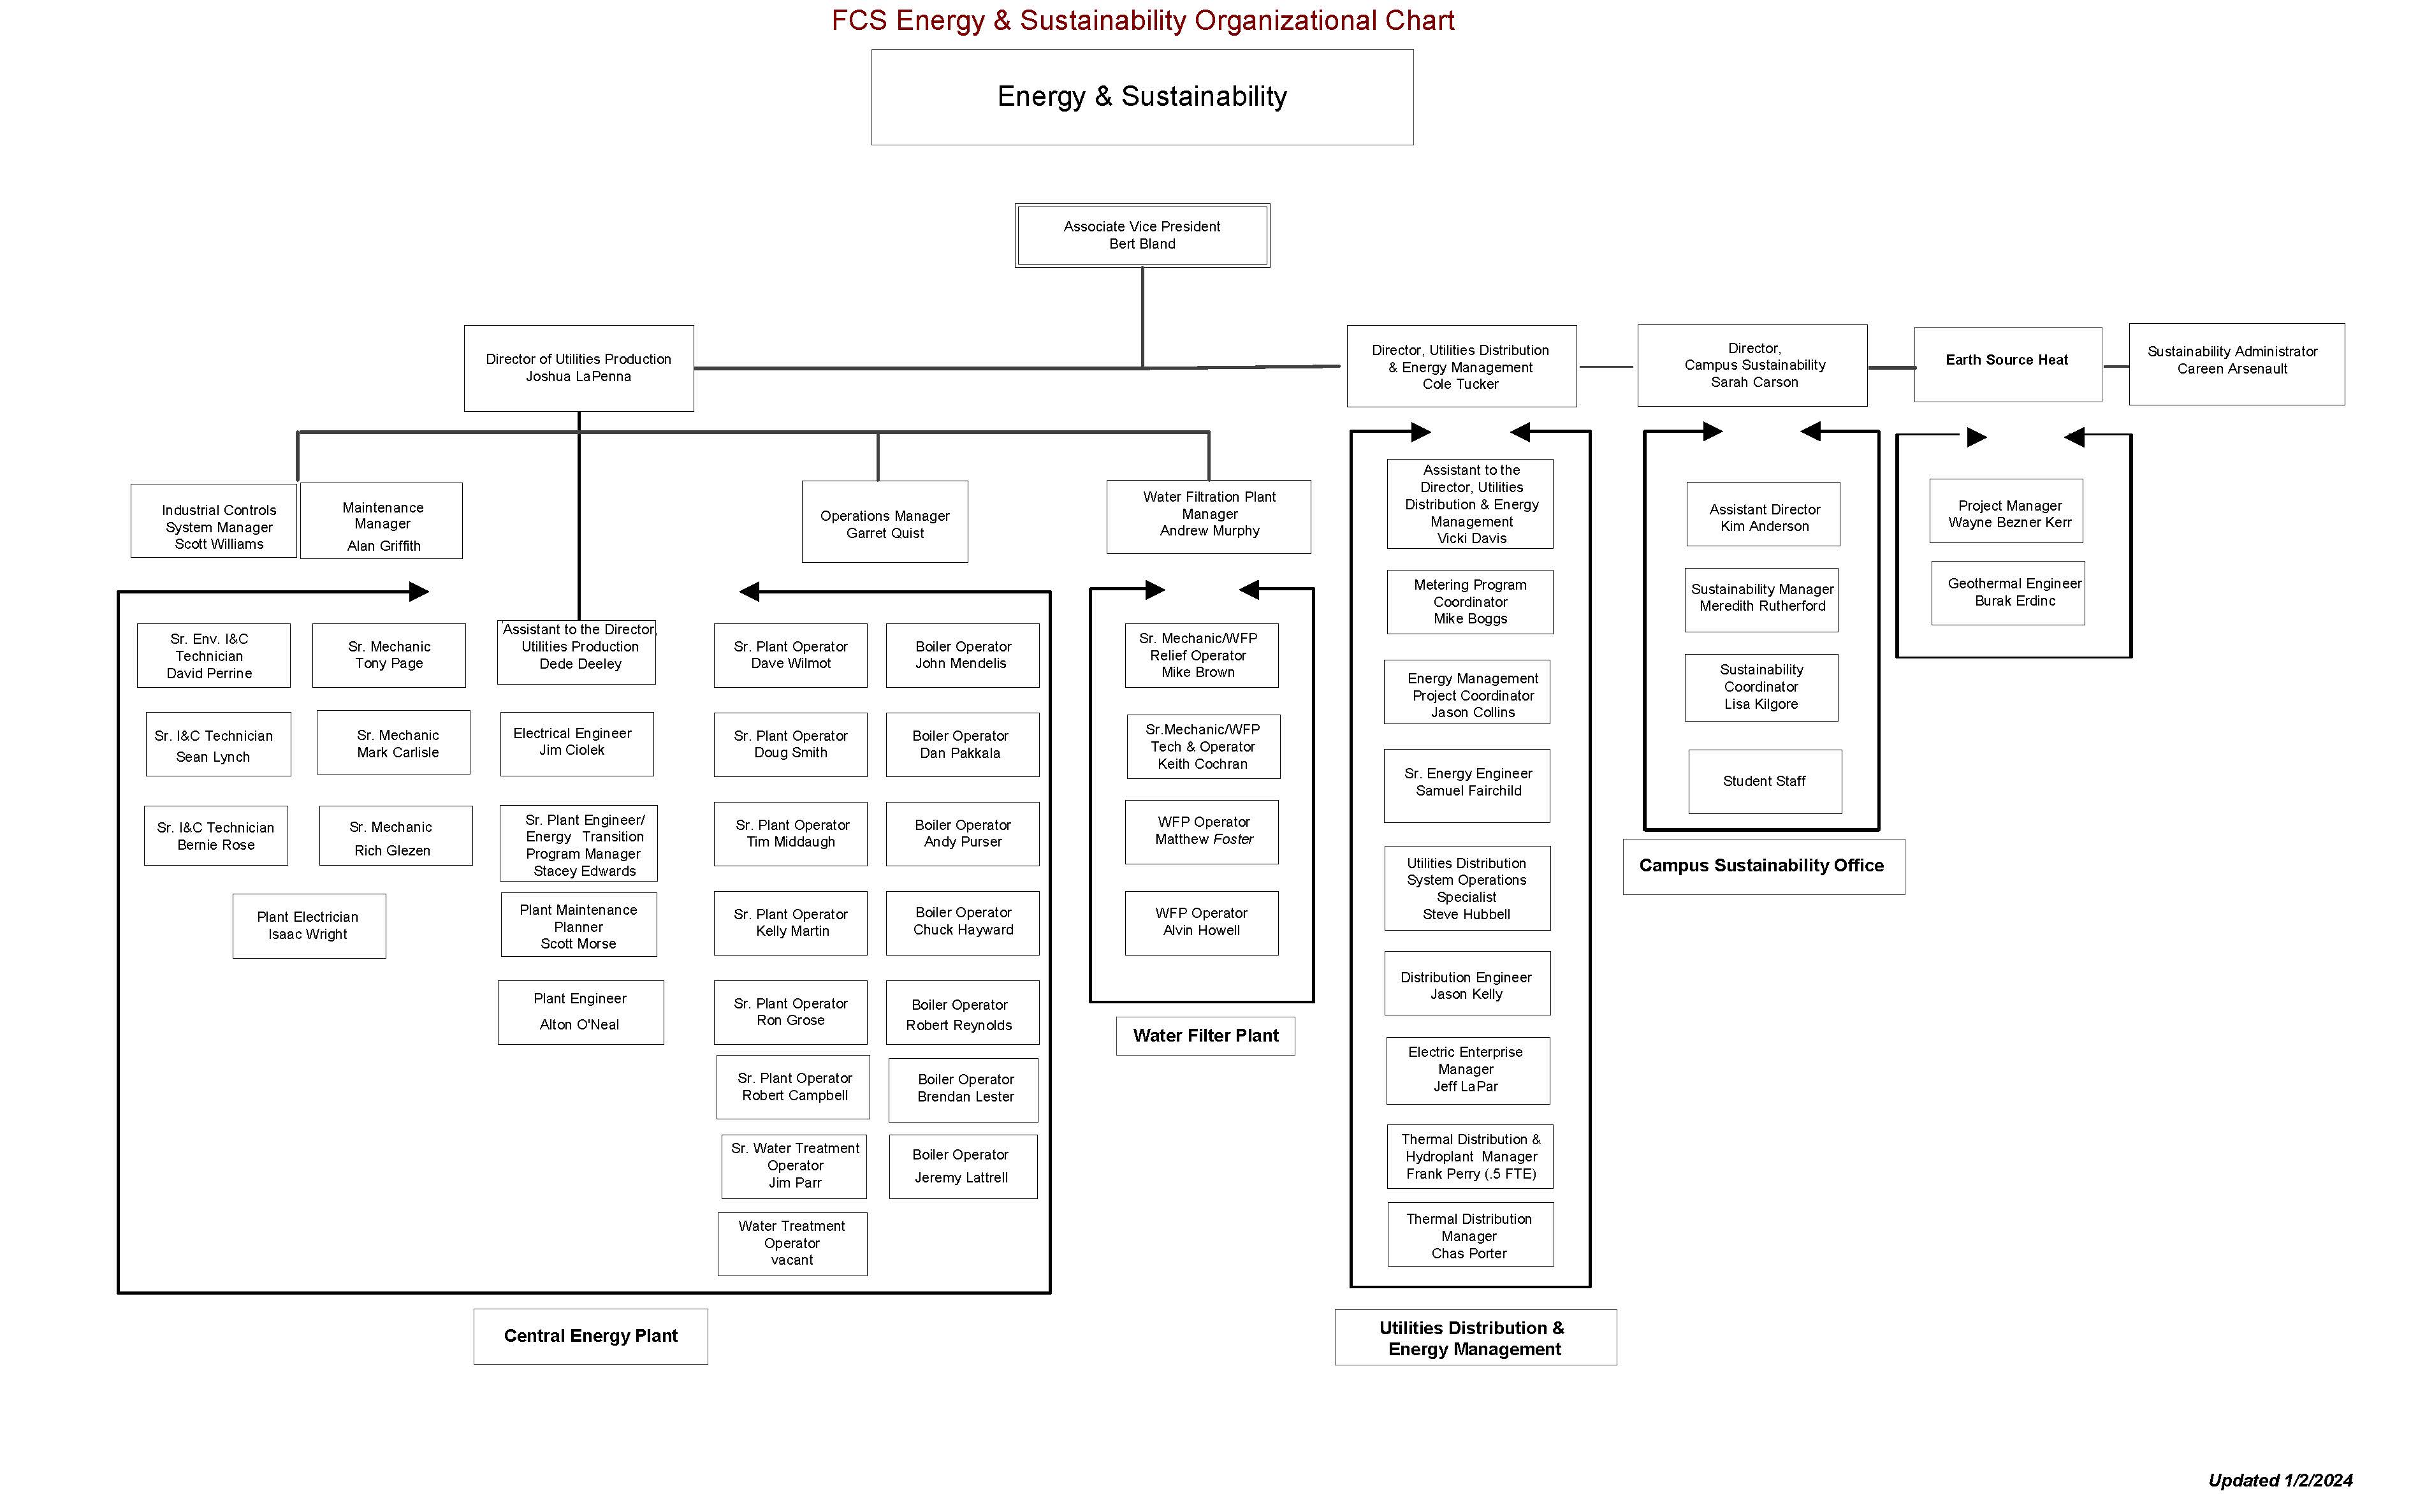 Energy and Sustainability Org Chart | Facilities and Campus Services